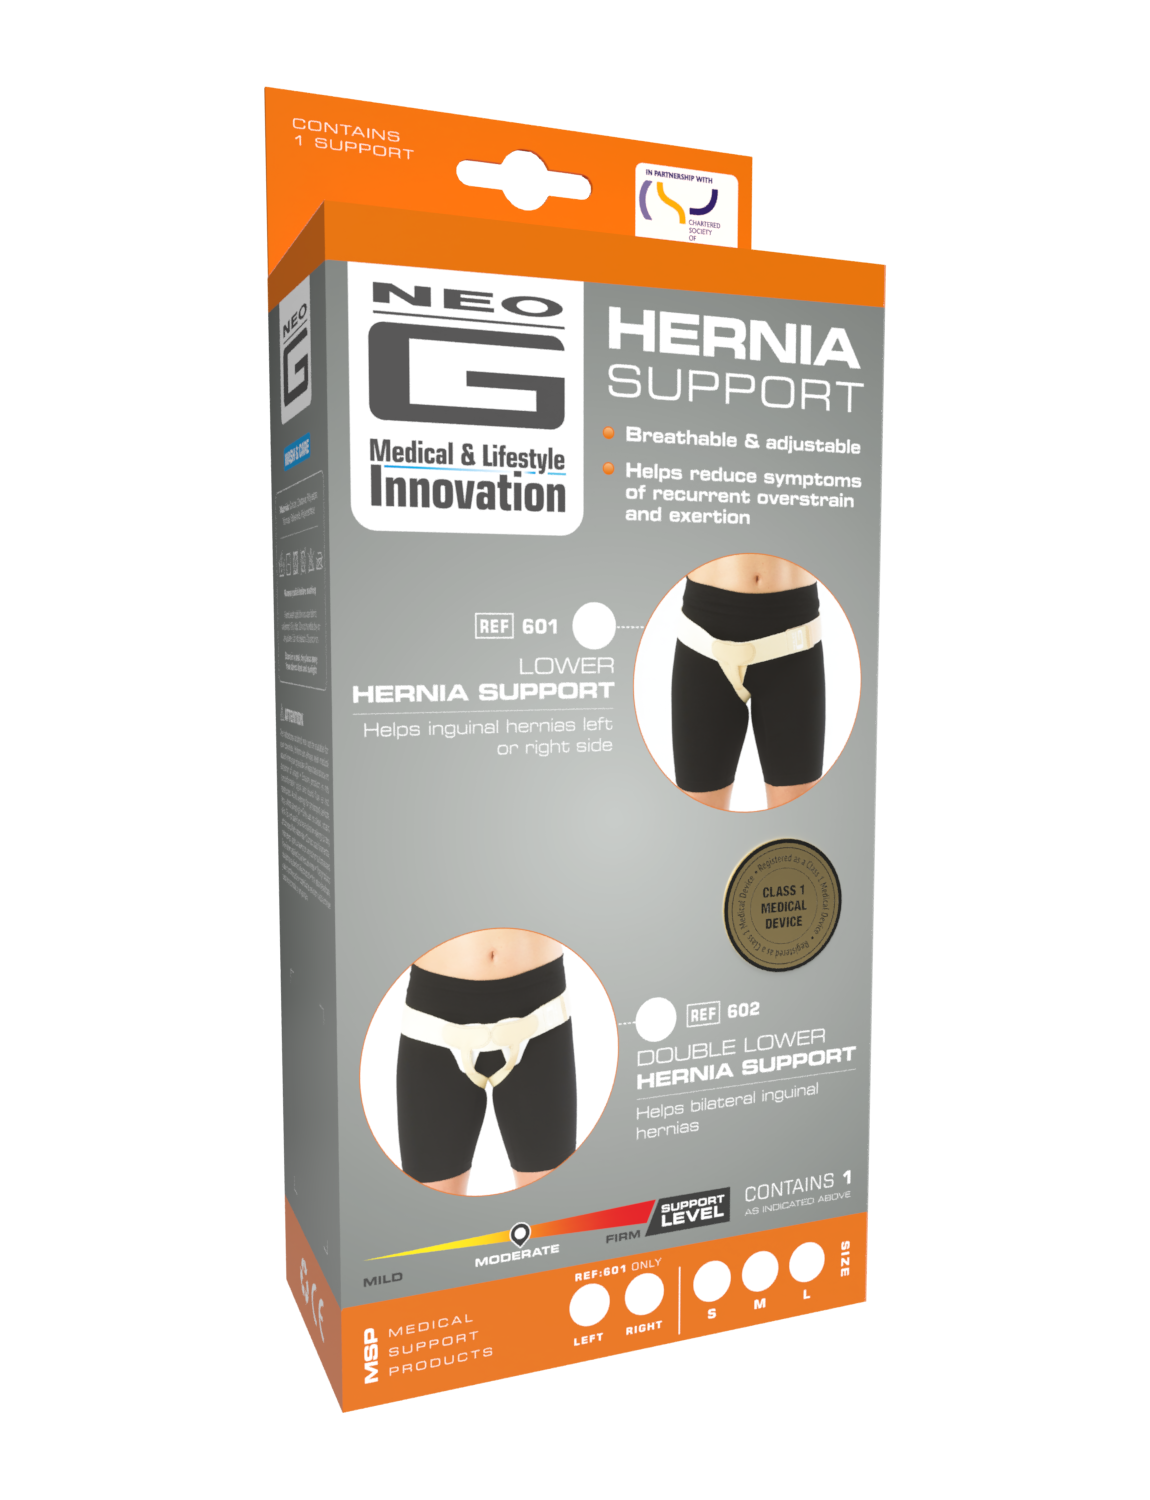 Double Lower Hernia Support